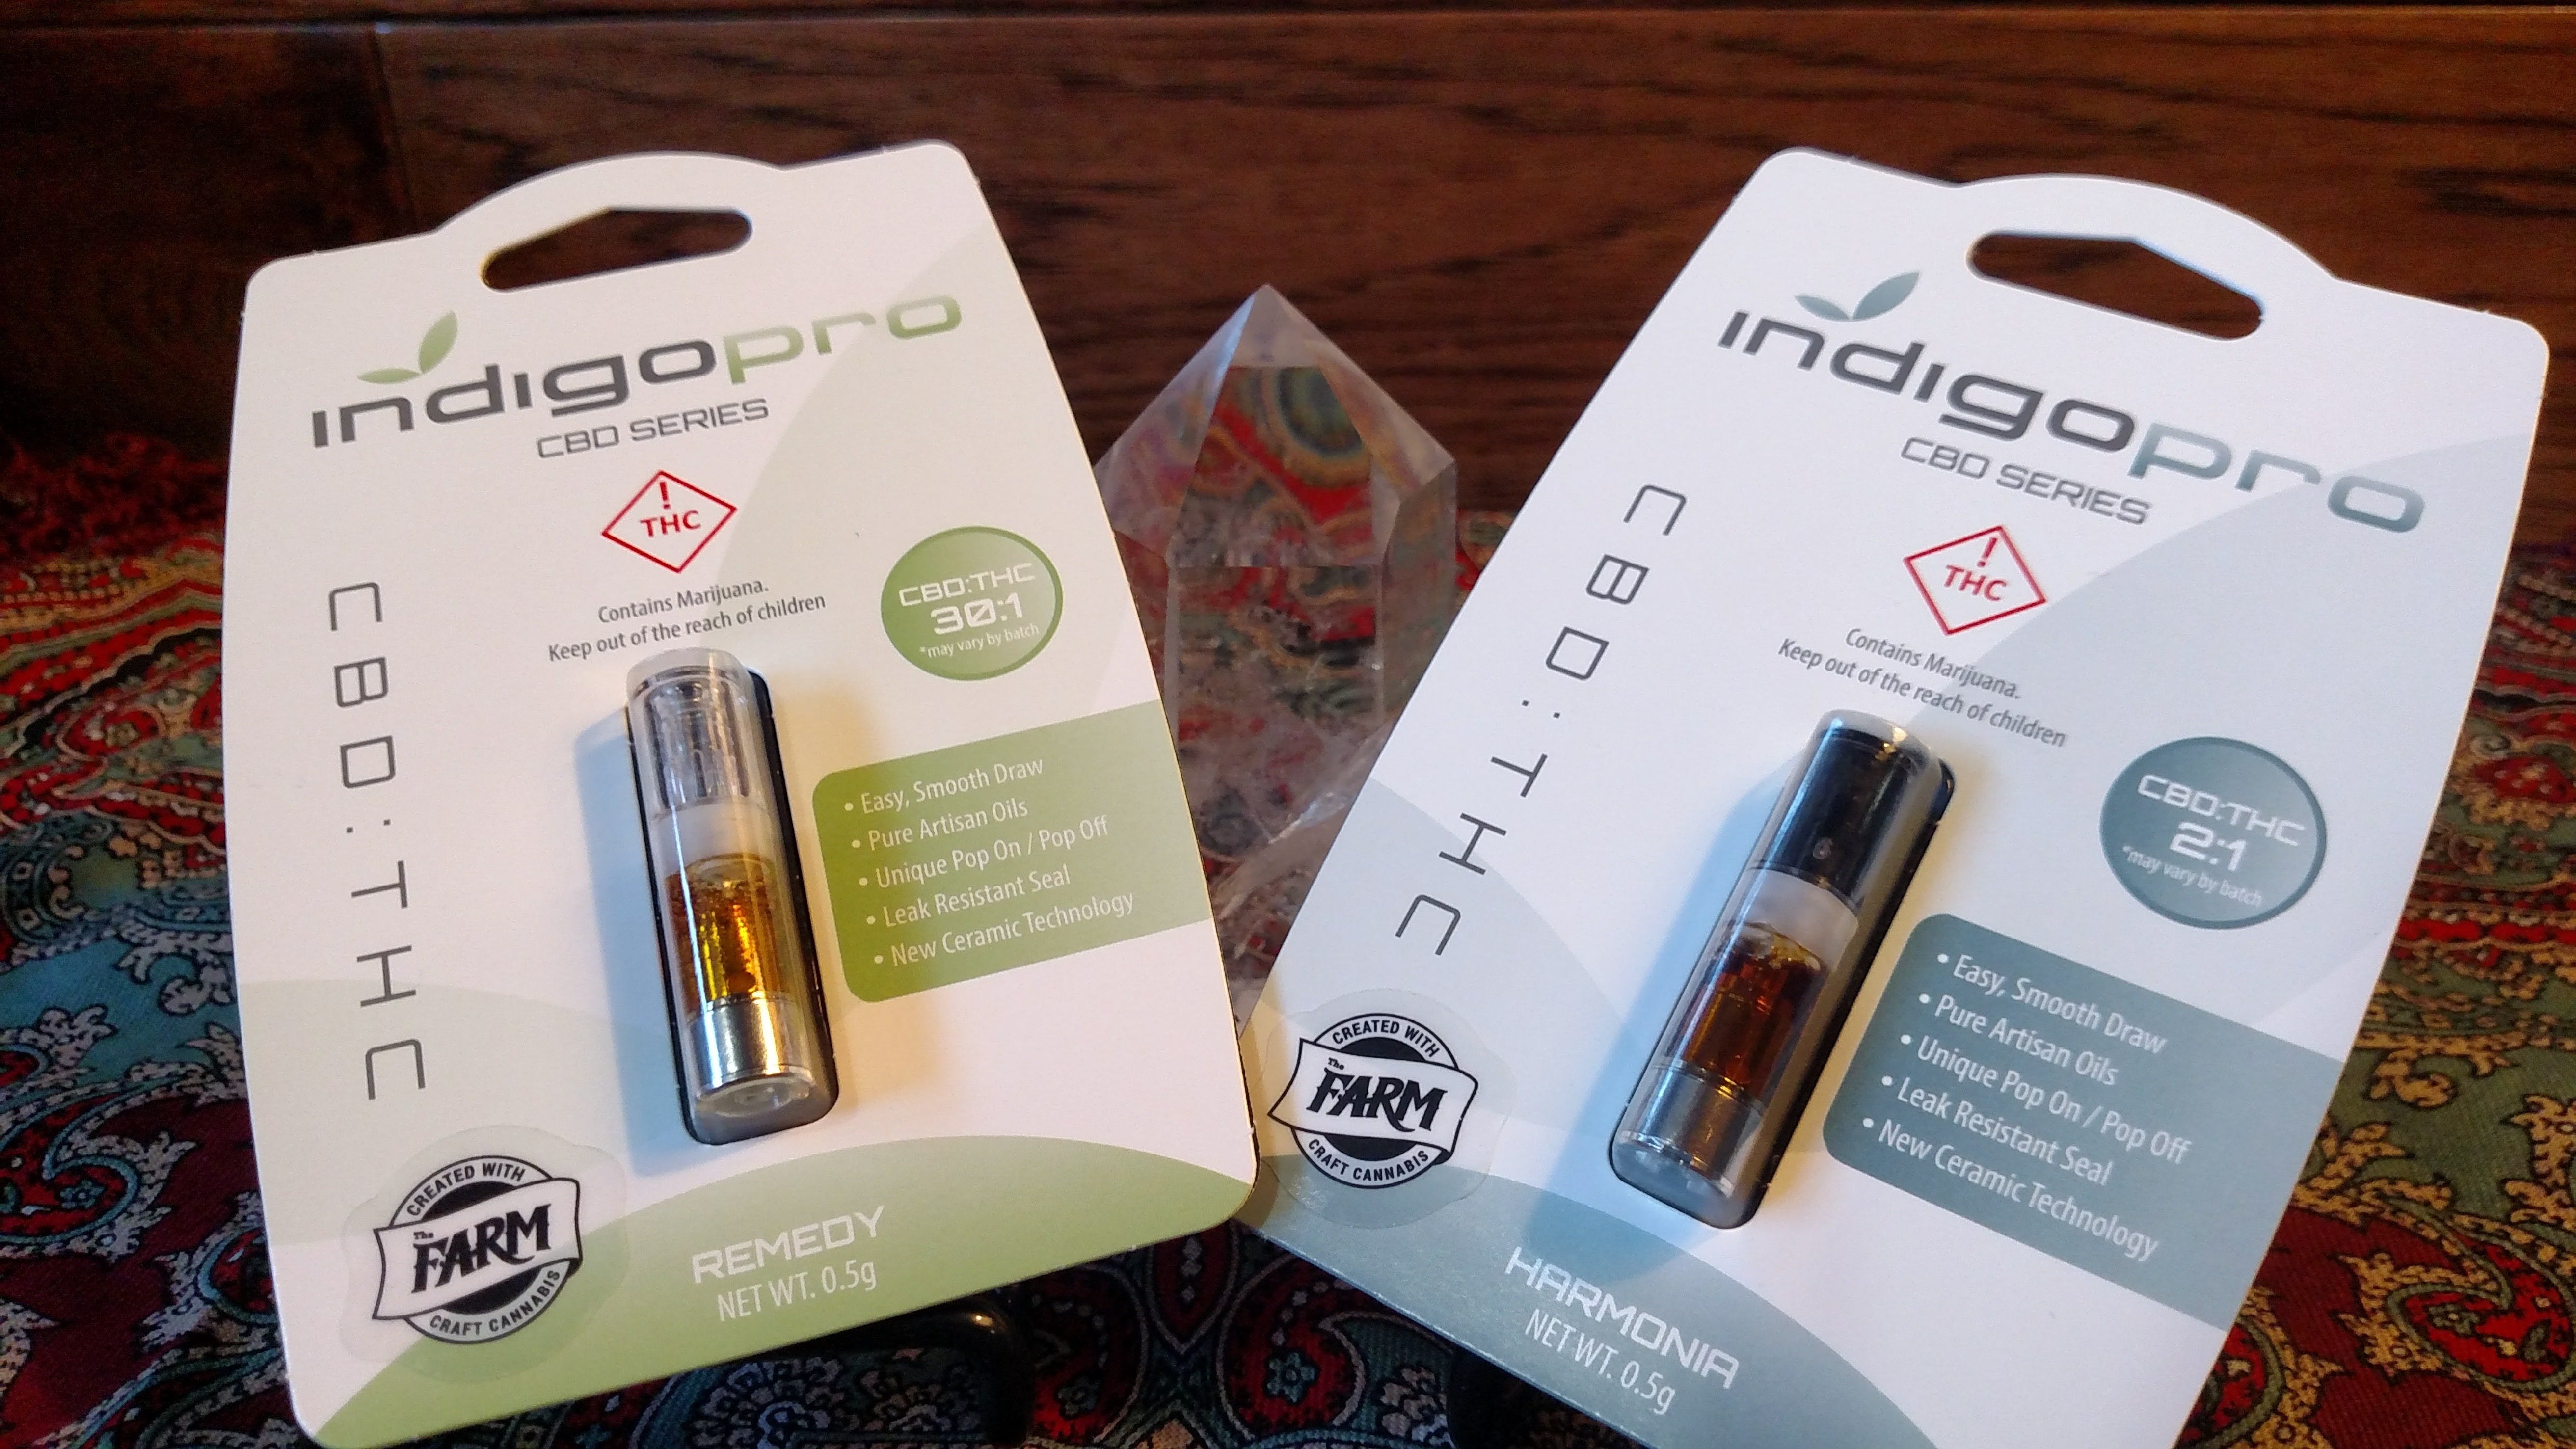 concentrate-airopro-cartridge-cbd-500mg